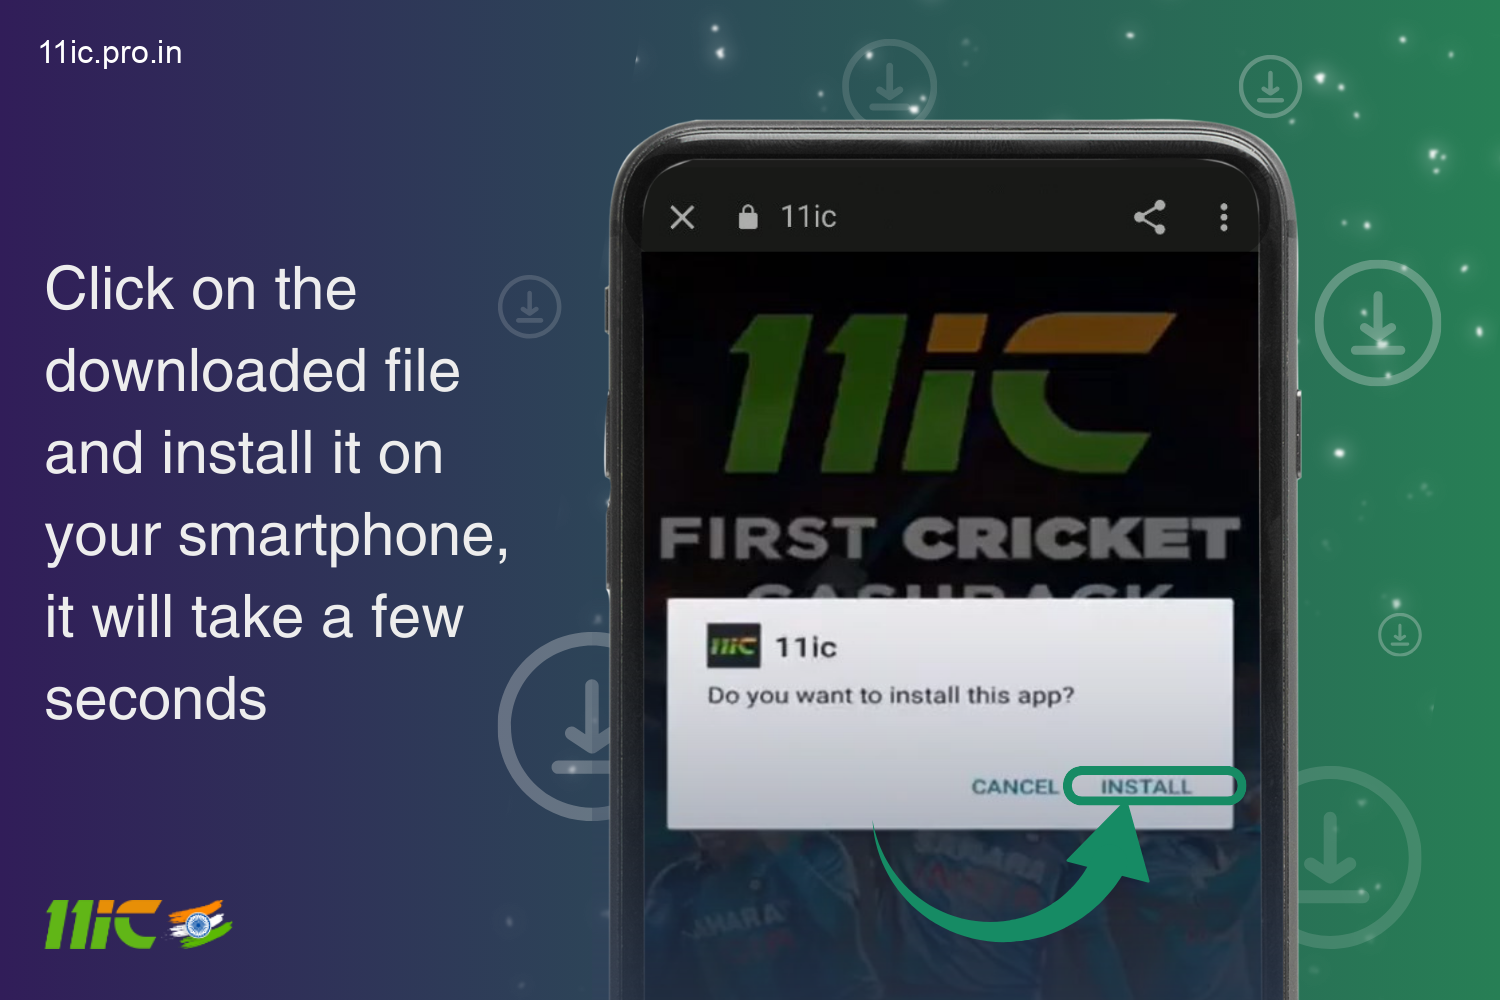 Install the 11ic app for Android by following the on-screen instructions